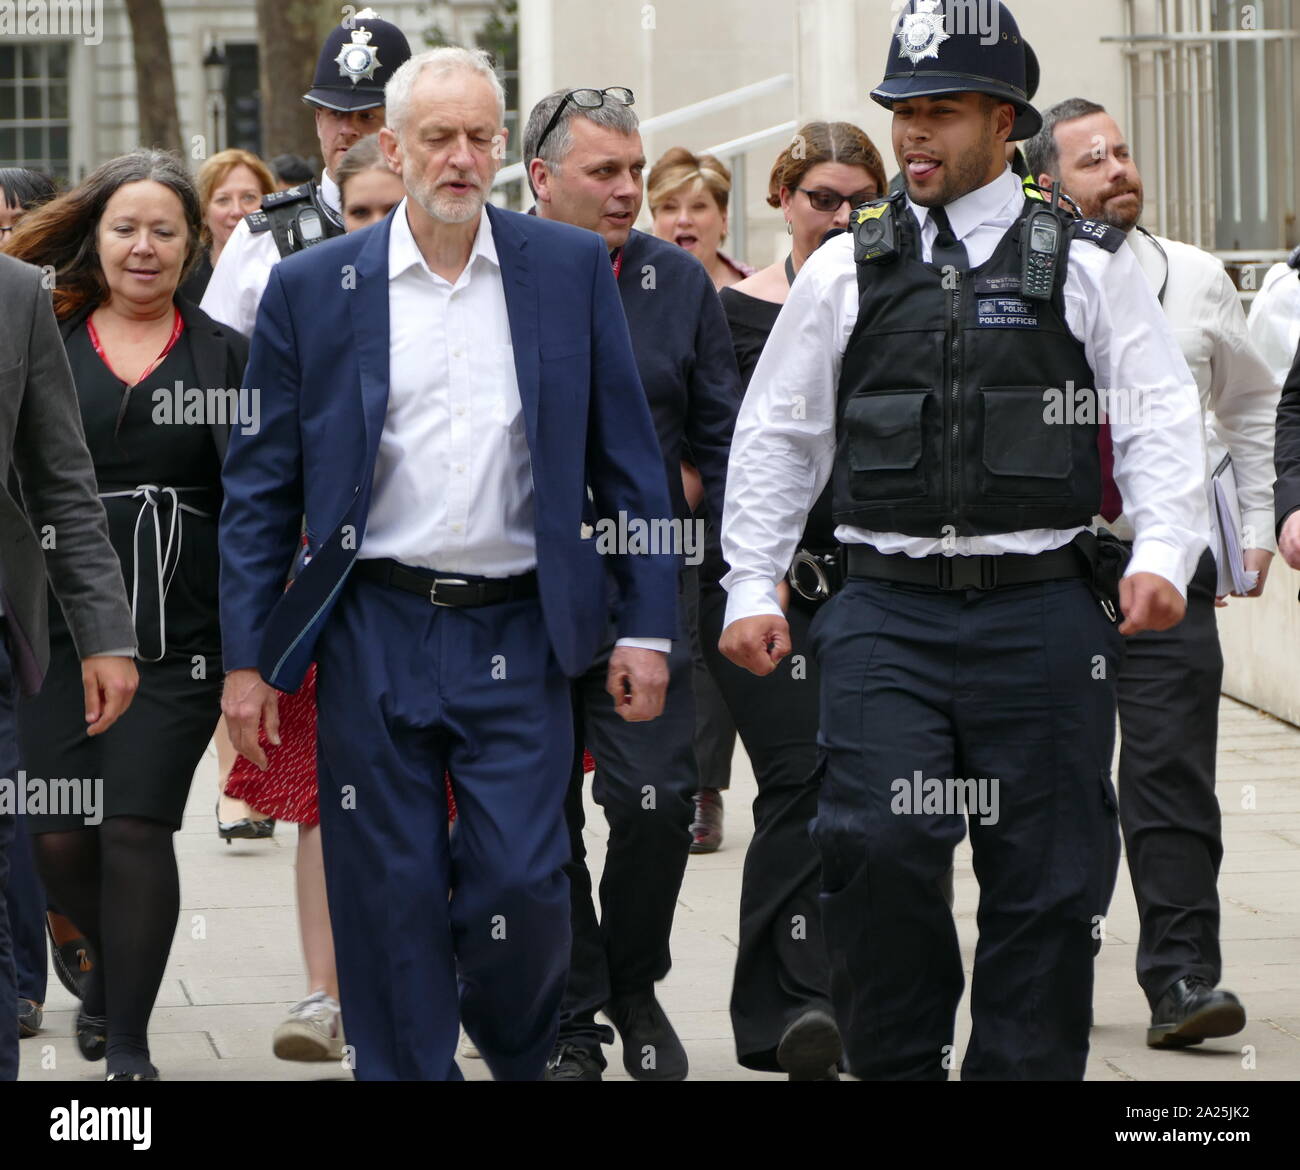 Labour Party Leader Jeremy Corbyn leaving a demonstration in Whitehall and Trafalgar Square London during the State Visit of US President Donald Trump to Great Britain; June 2019 Stock Photo